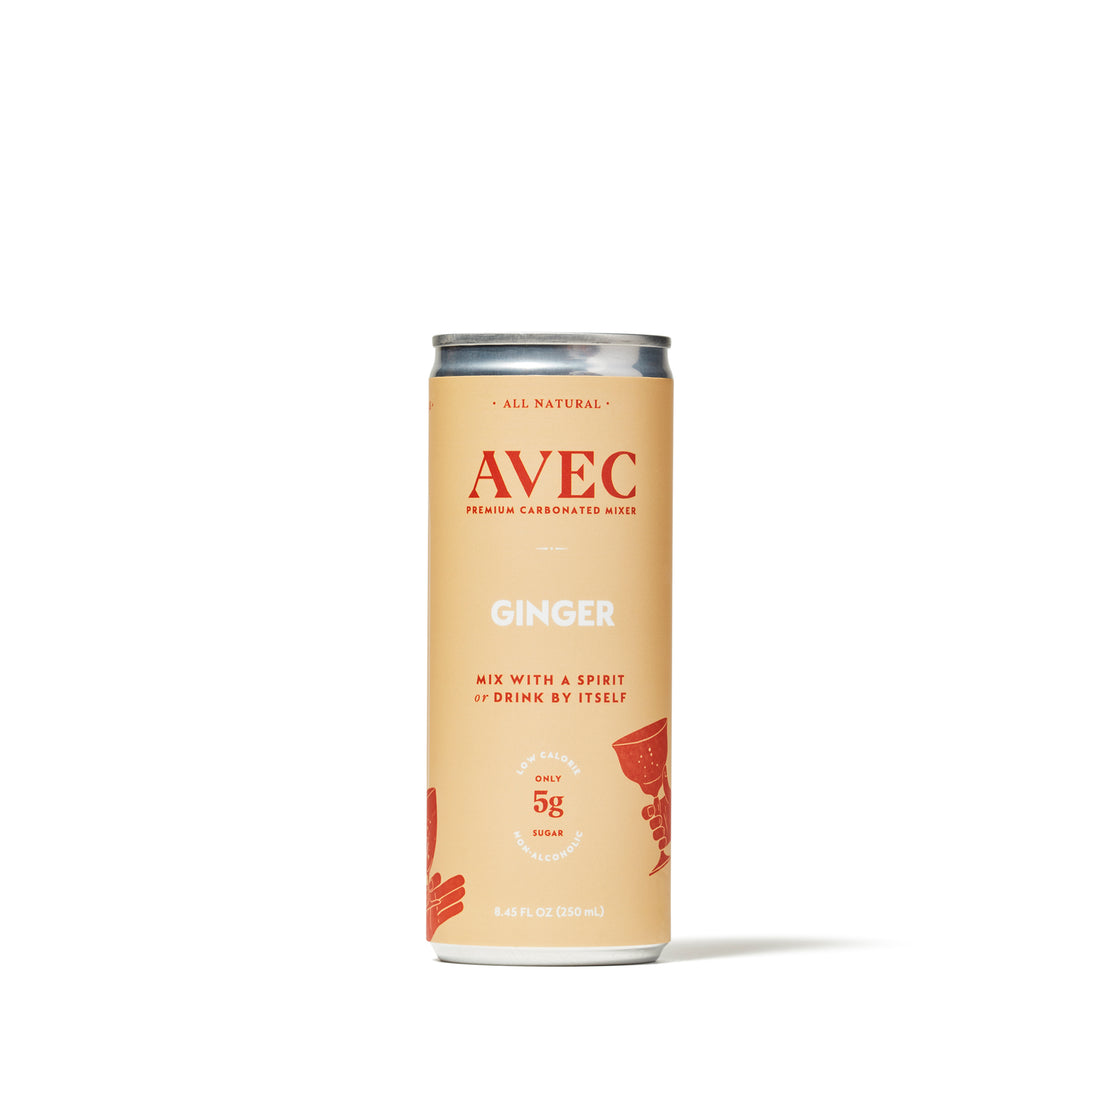 AVEC - Ginger 4-pack - Non-Alcoholic Sparkling Beverage - Boisson — Brooklyn's Non-Alcoholic Spirits, Beer, Wine, and Home Bar Shop in Cobble Hill